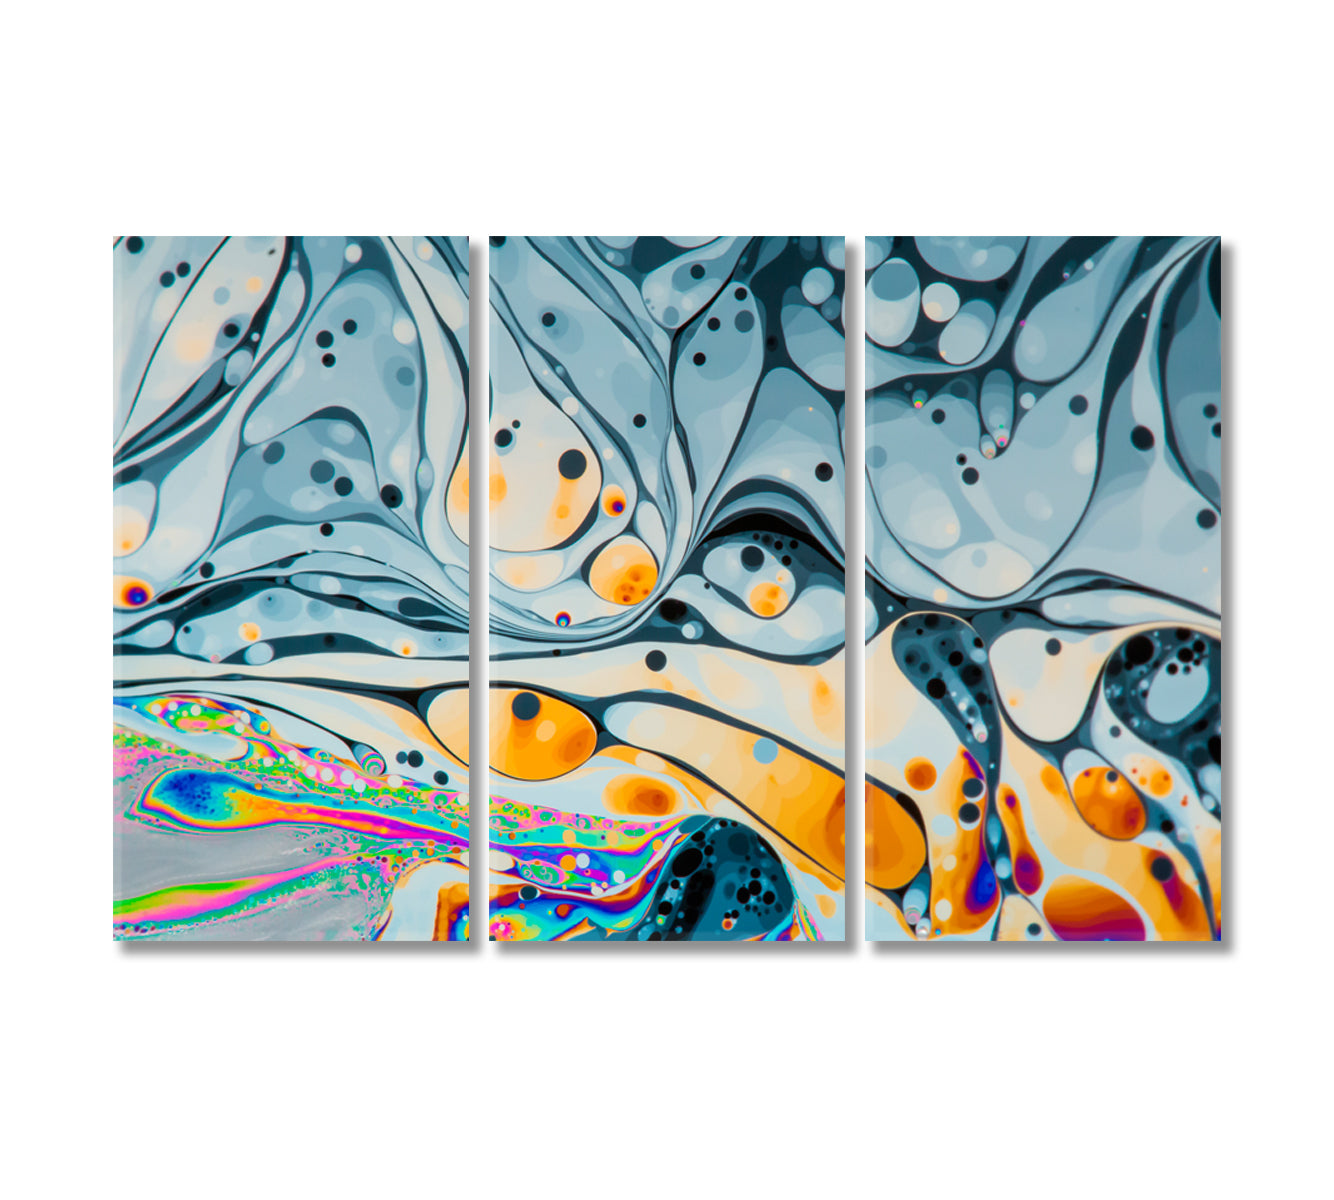 Abstract Psychedelic Soap Bubble Canvas Print-Canvas Print-CetArt-3 Panels-36x24 inches-CetArt